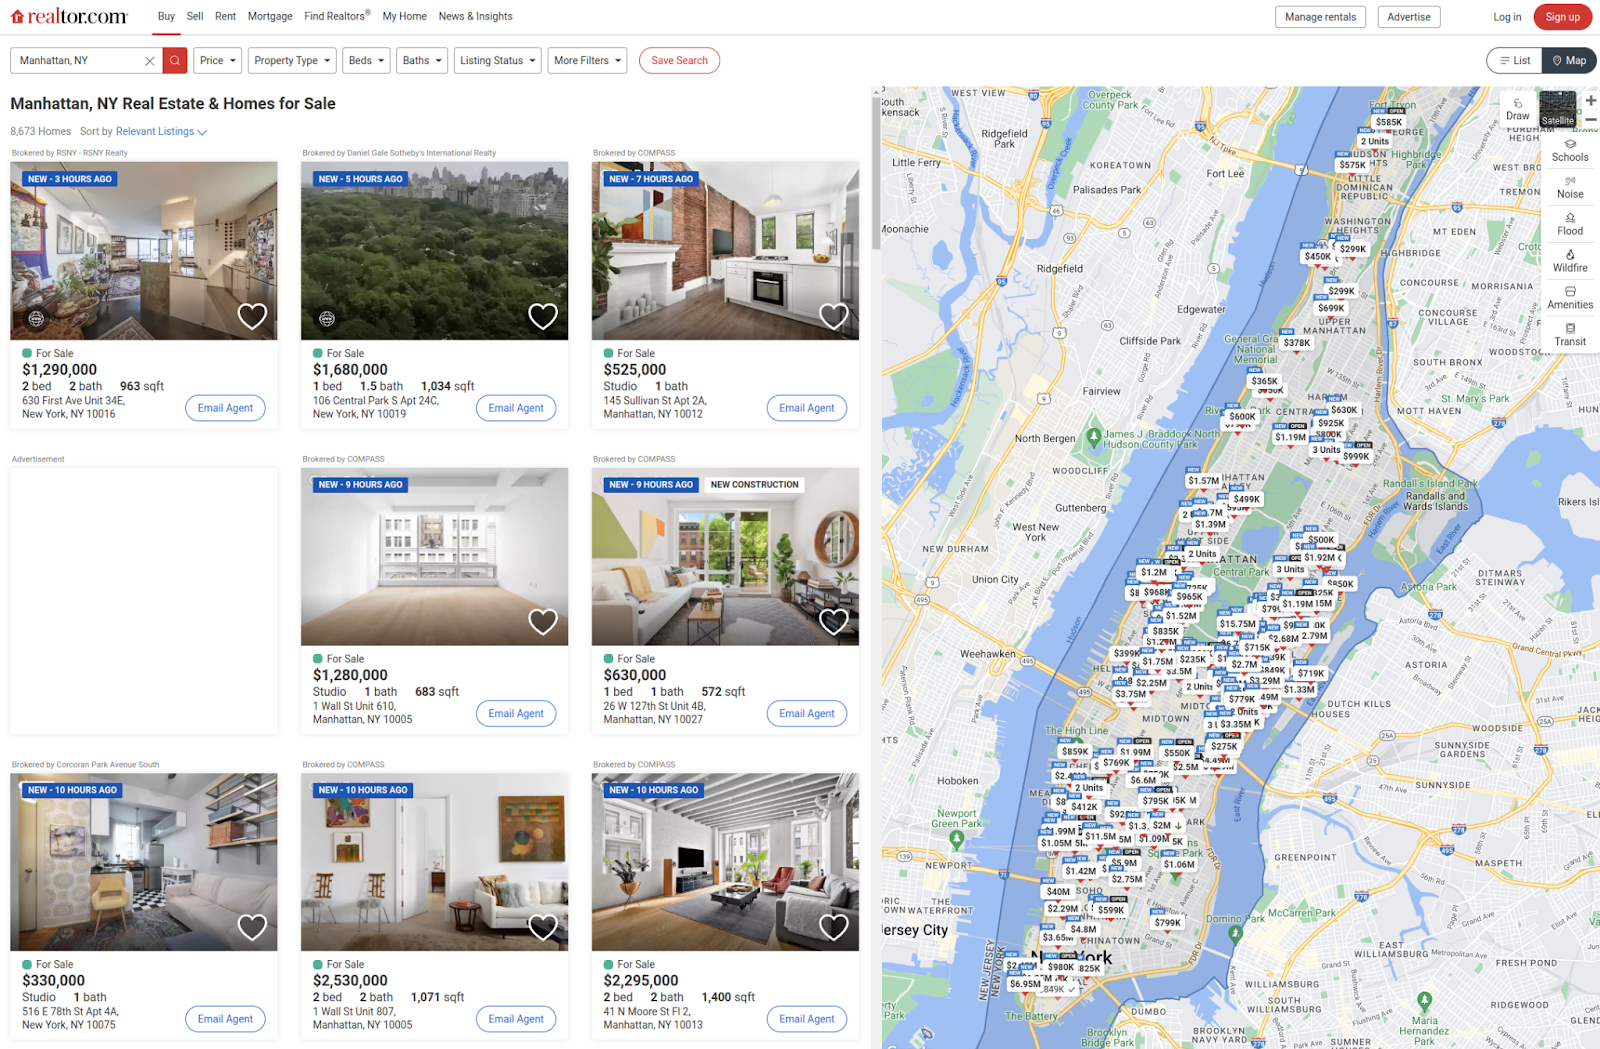 Realtor.com with 8000+ apartments on sale for Manhattan